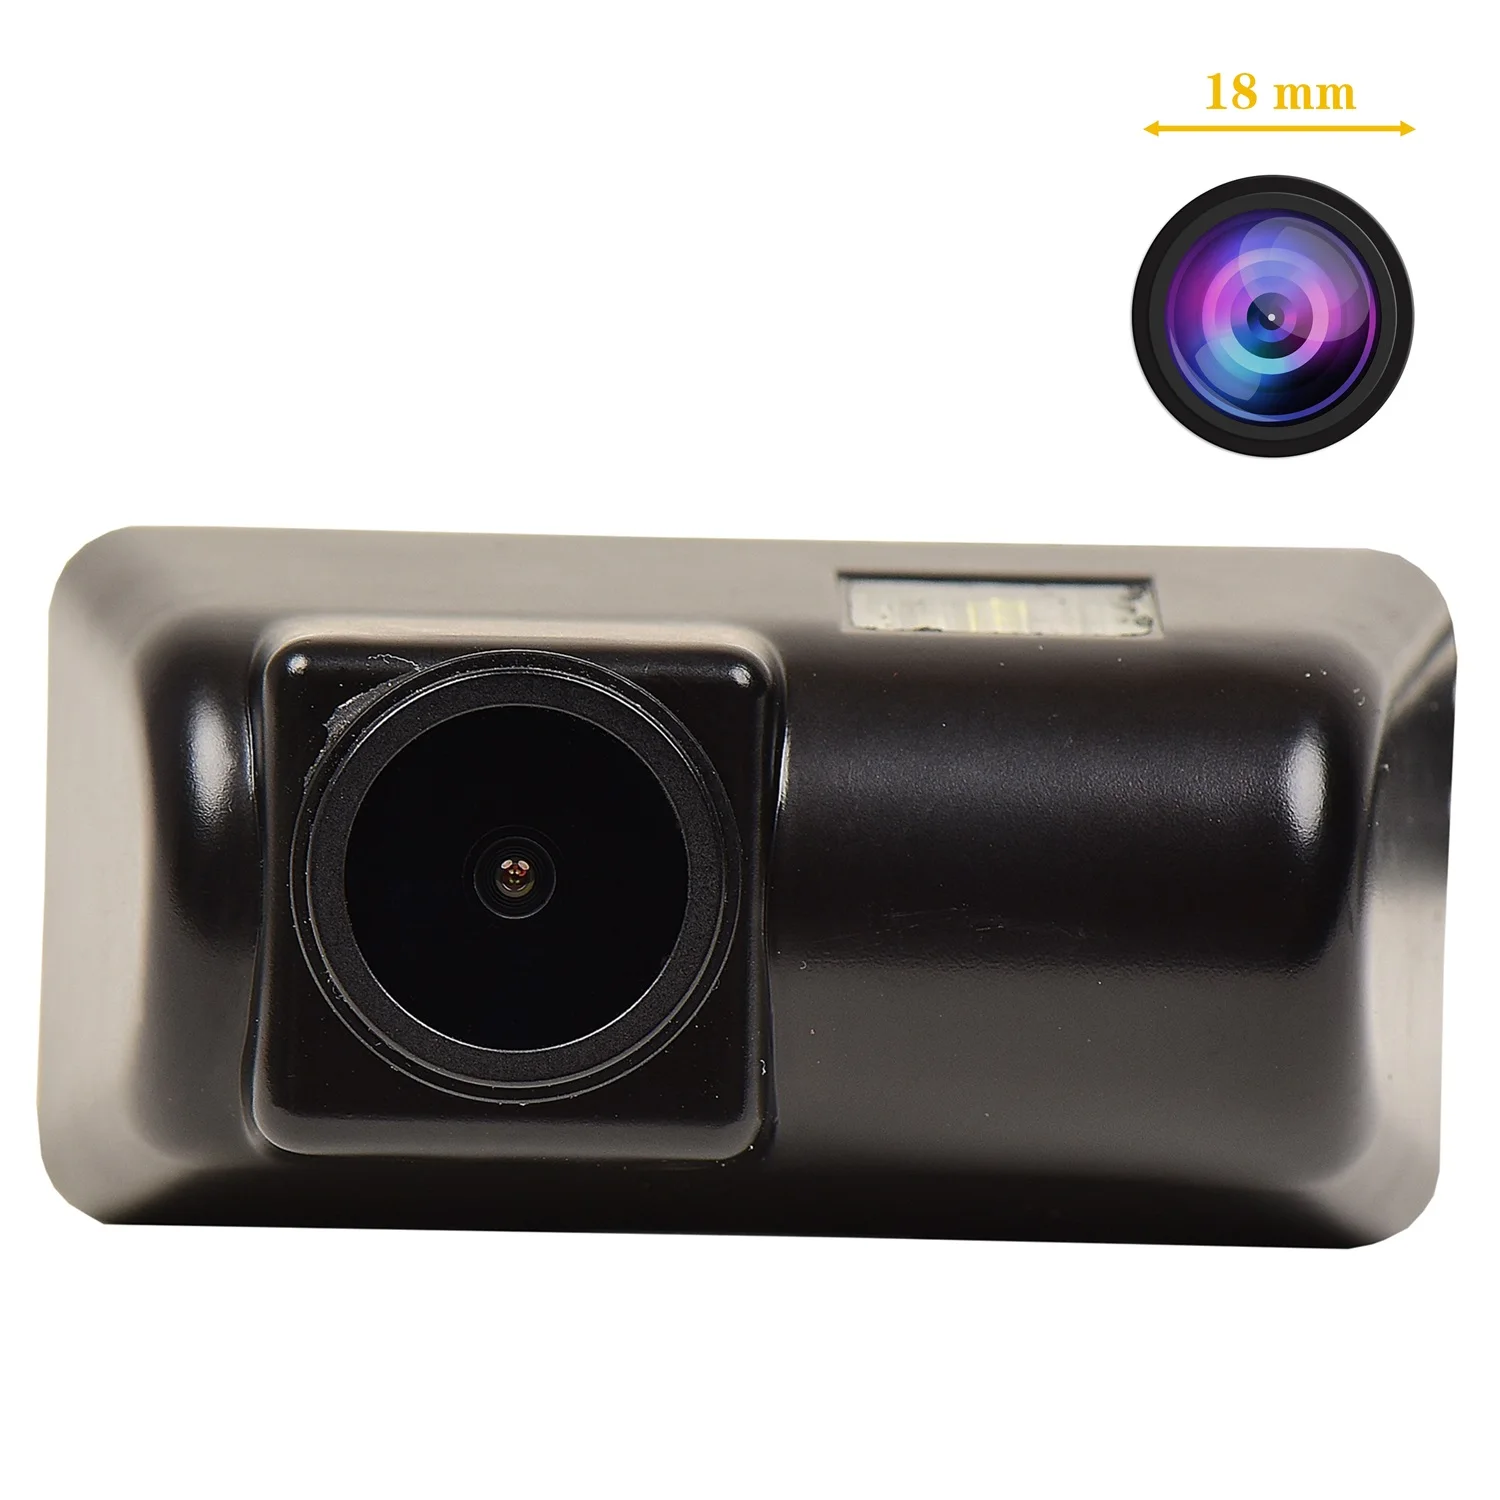 

Misayaee Free Filter HD 1280 * 720P Car Rear View Camera Plate Light for FOR D Transit MK6 /MK7 Connect Transporter